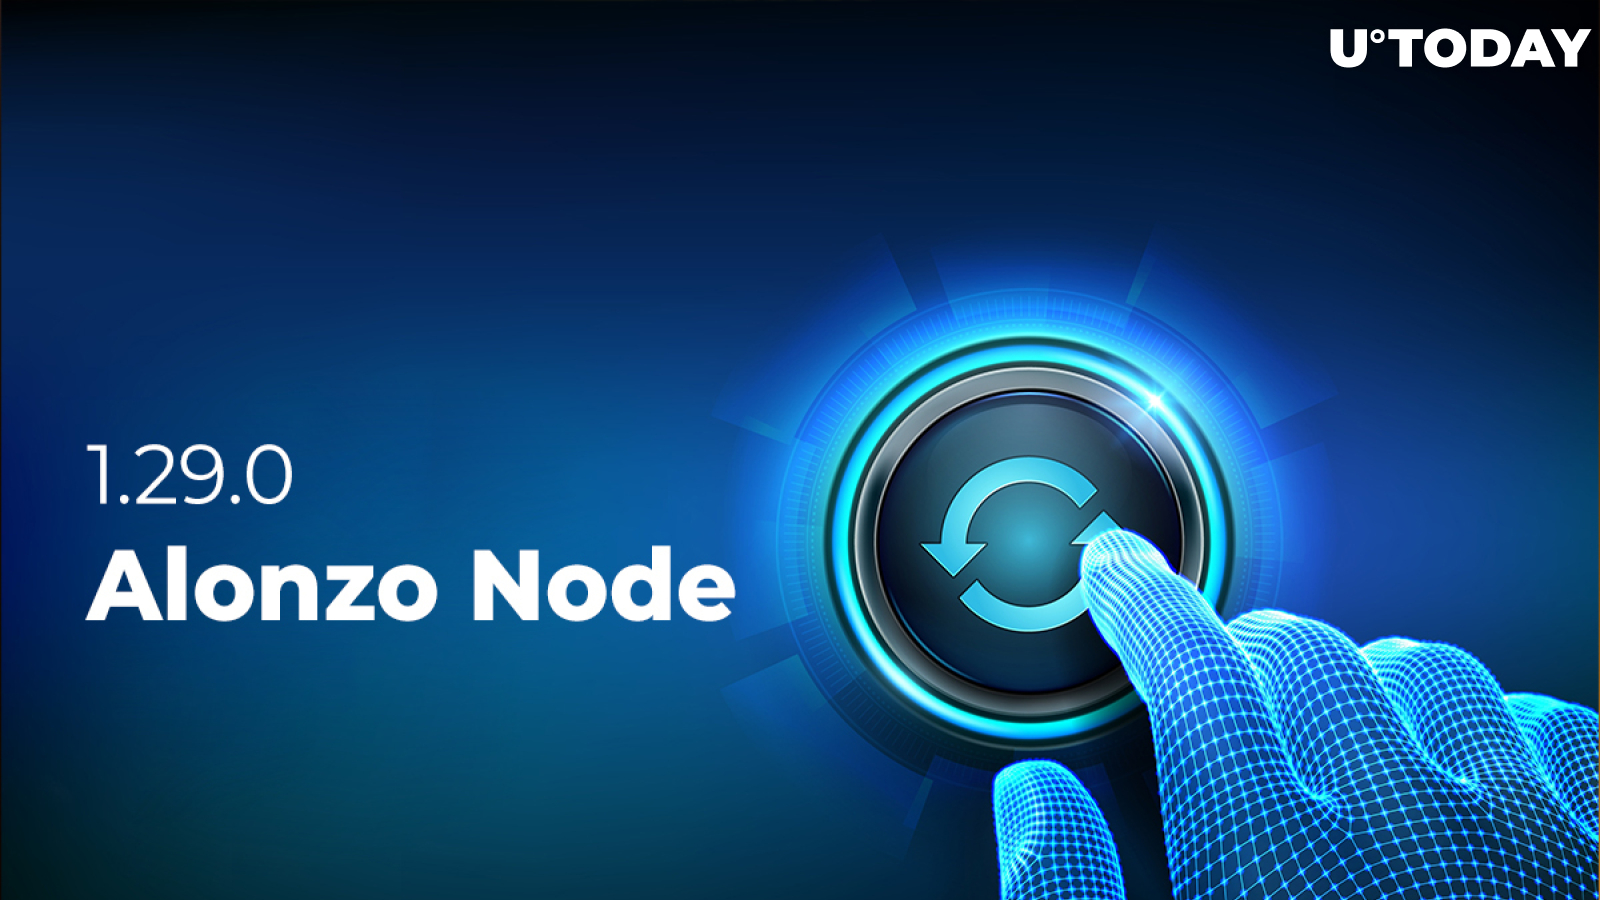 64% of Pools Upgraded to 1.29.0 Alonzo Node, Ready for Cardano’s Hard Fork